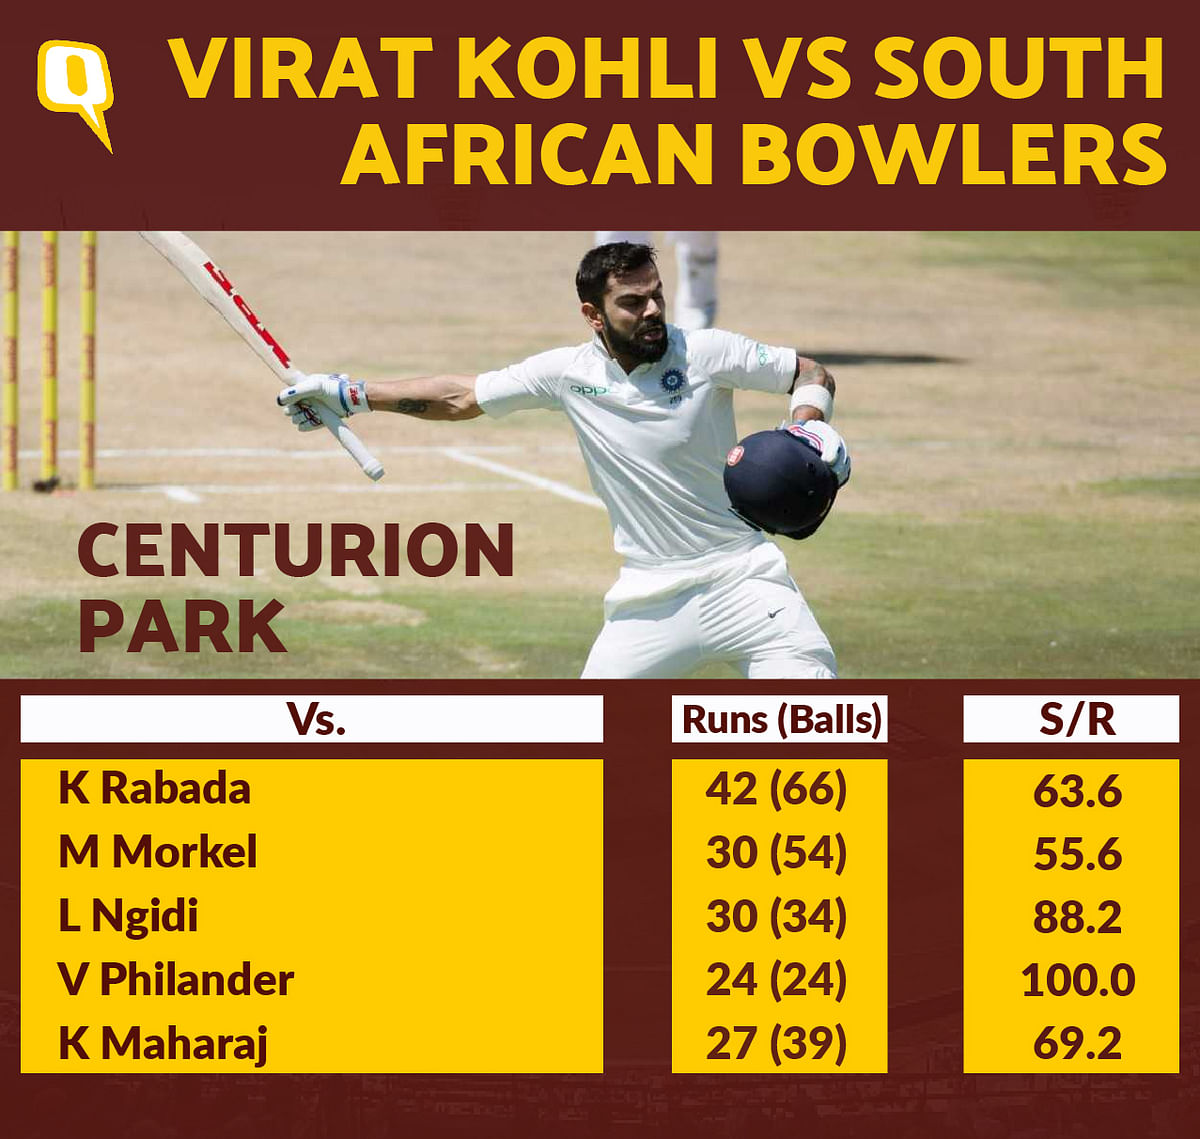 Virat Kohli became the second Indian cricketer to score two centuries in South Africa, the first was Sachin.